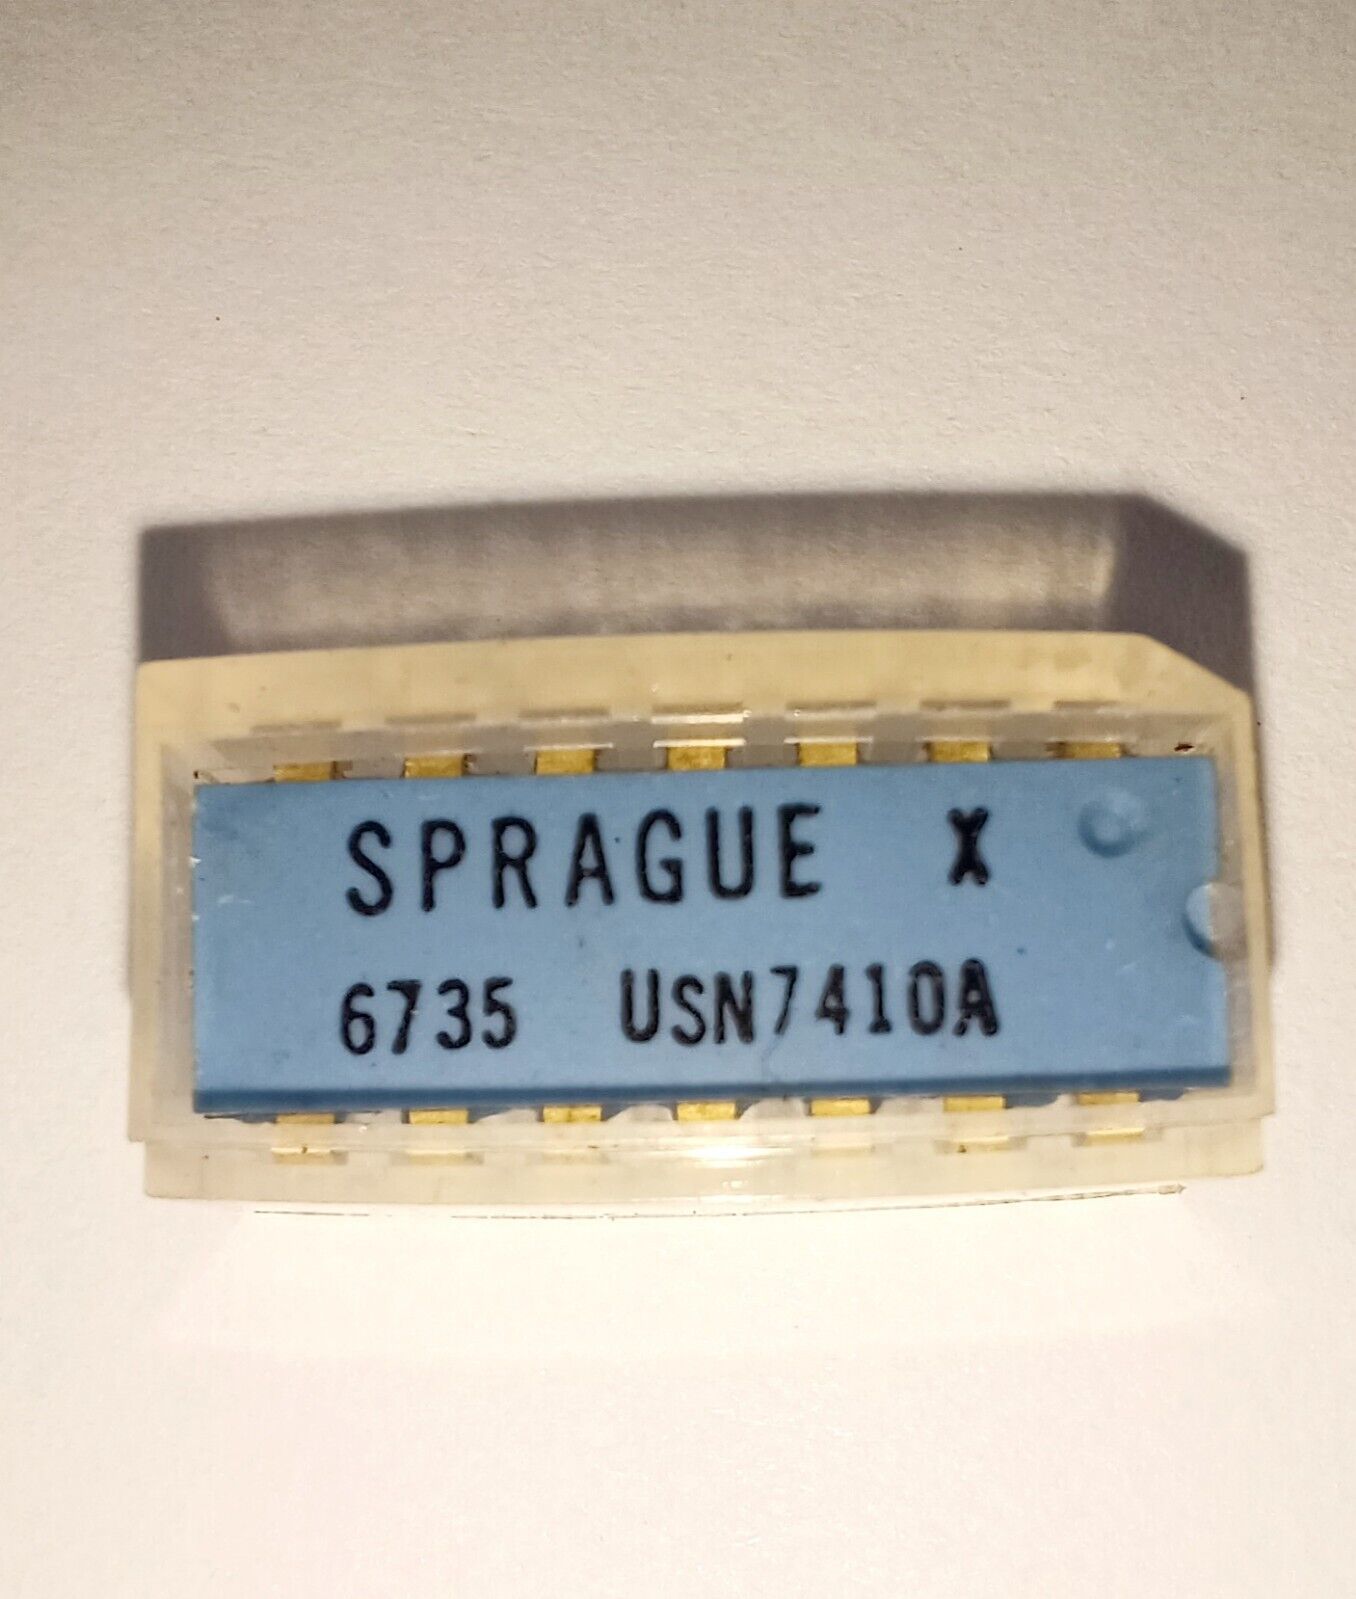 Sprague USN7410A IC chip microchip DIP-14 vintage from 1967 Gold plated legs